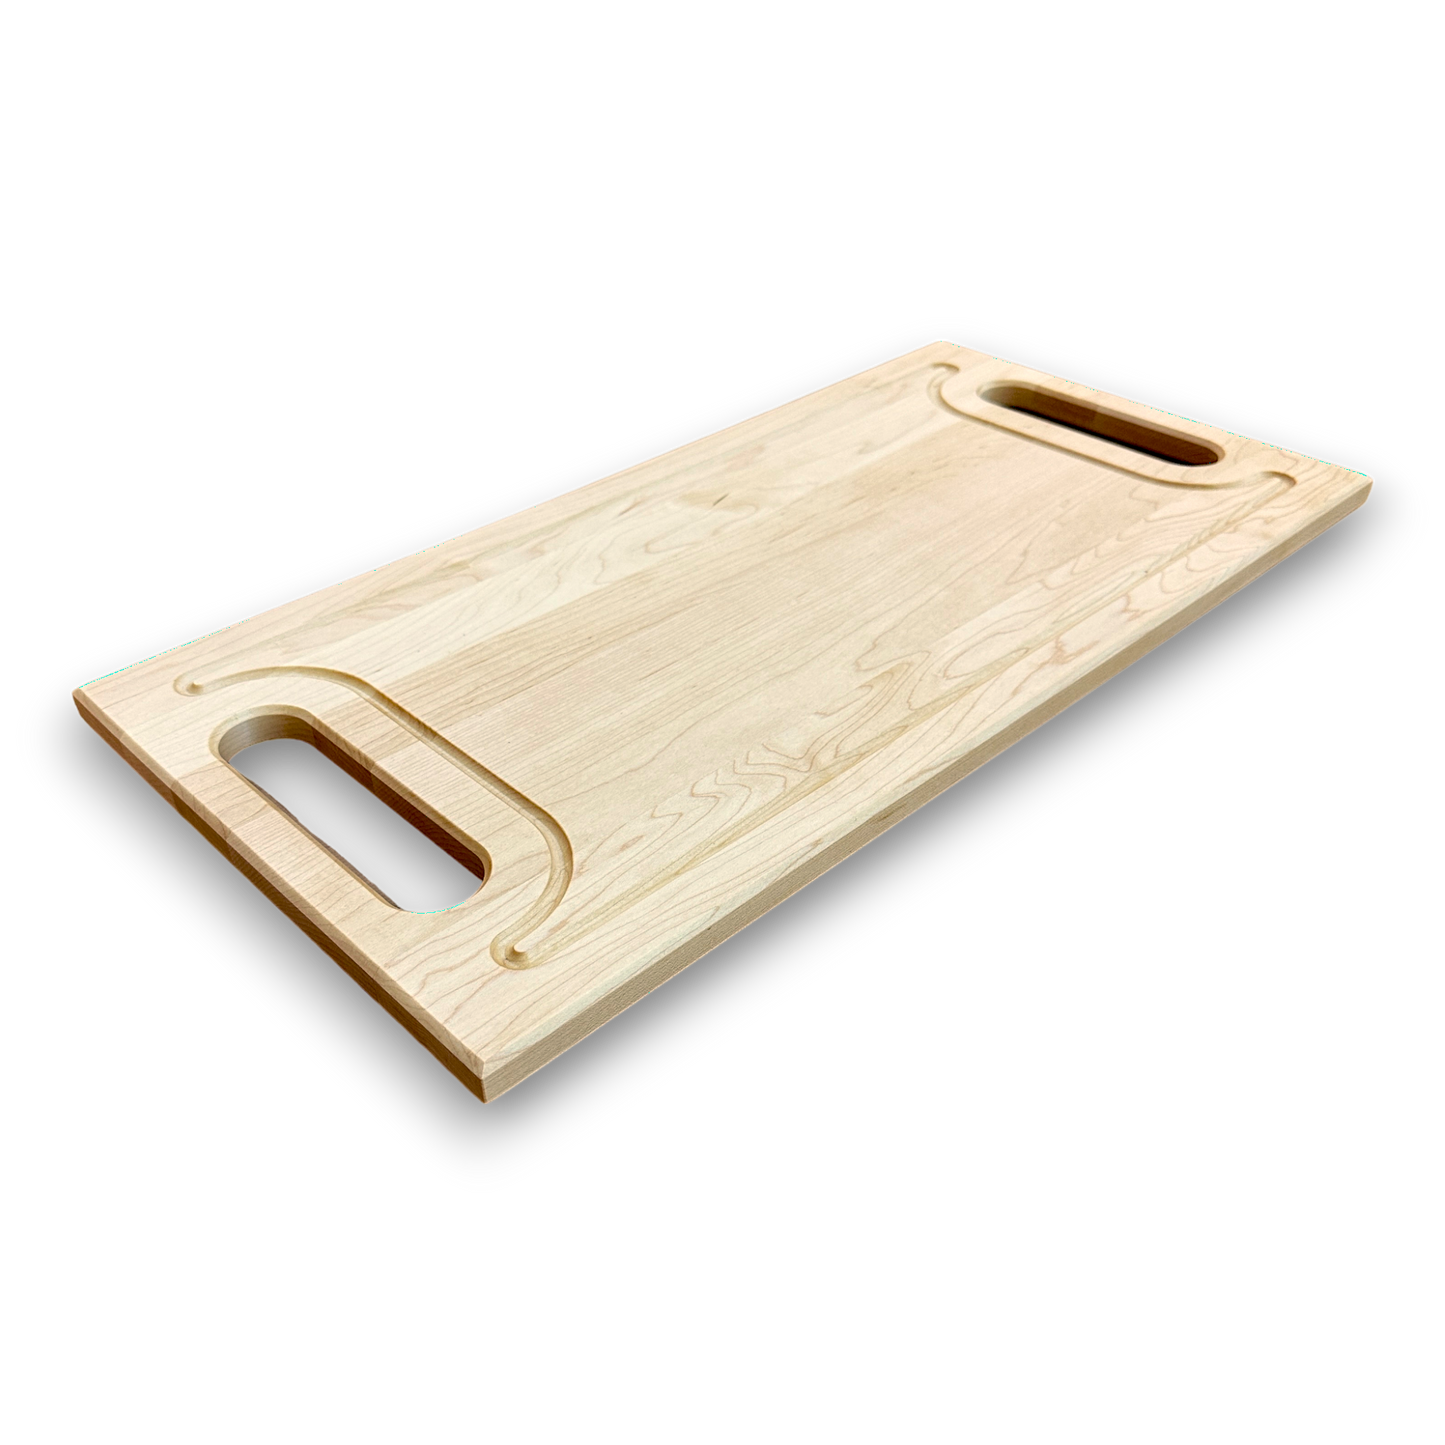 3/4" serving plate with handles in Maple Wood - BOISWOOD